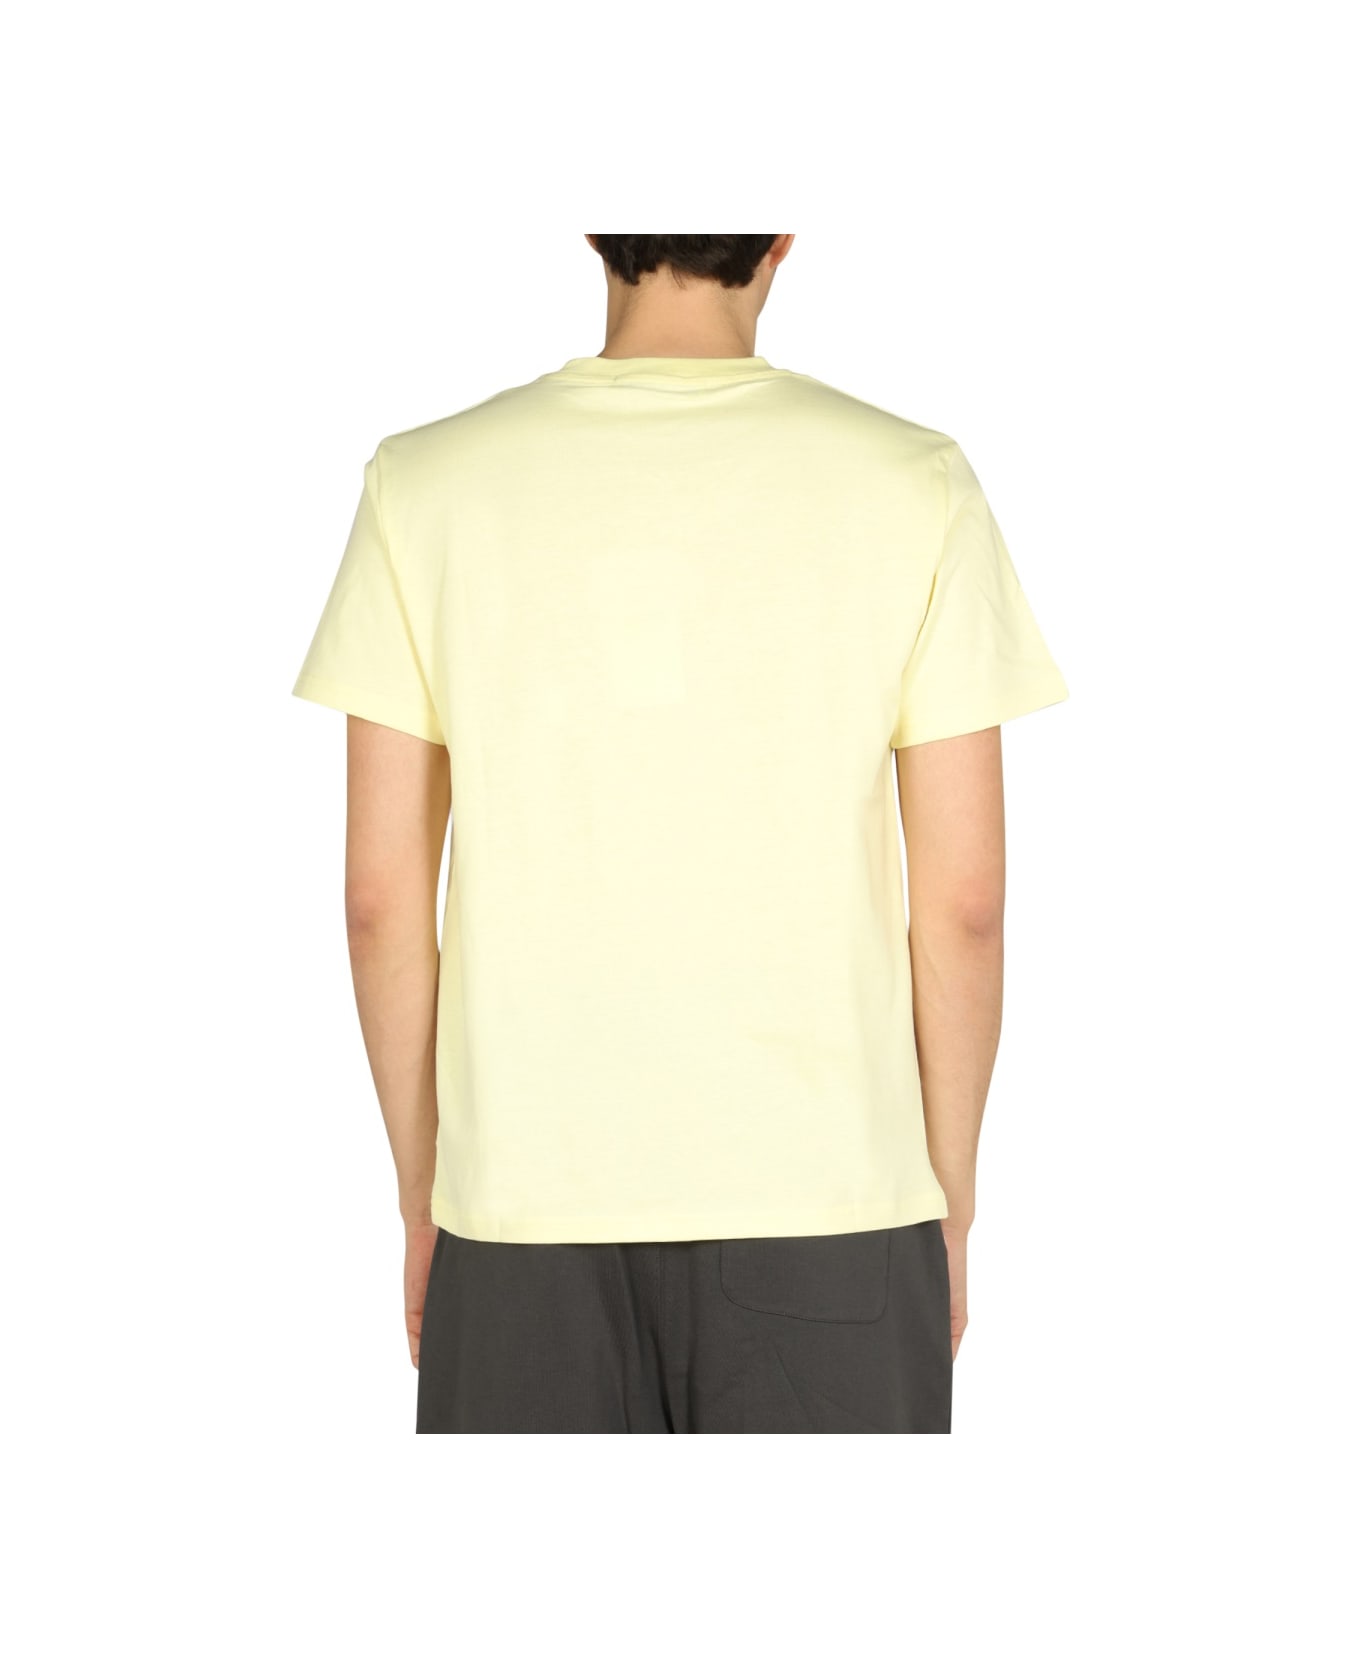 Department Five "aleph" T-shirt - YELLOW